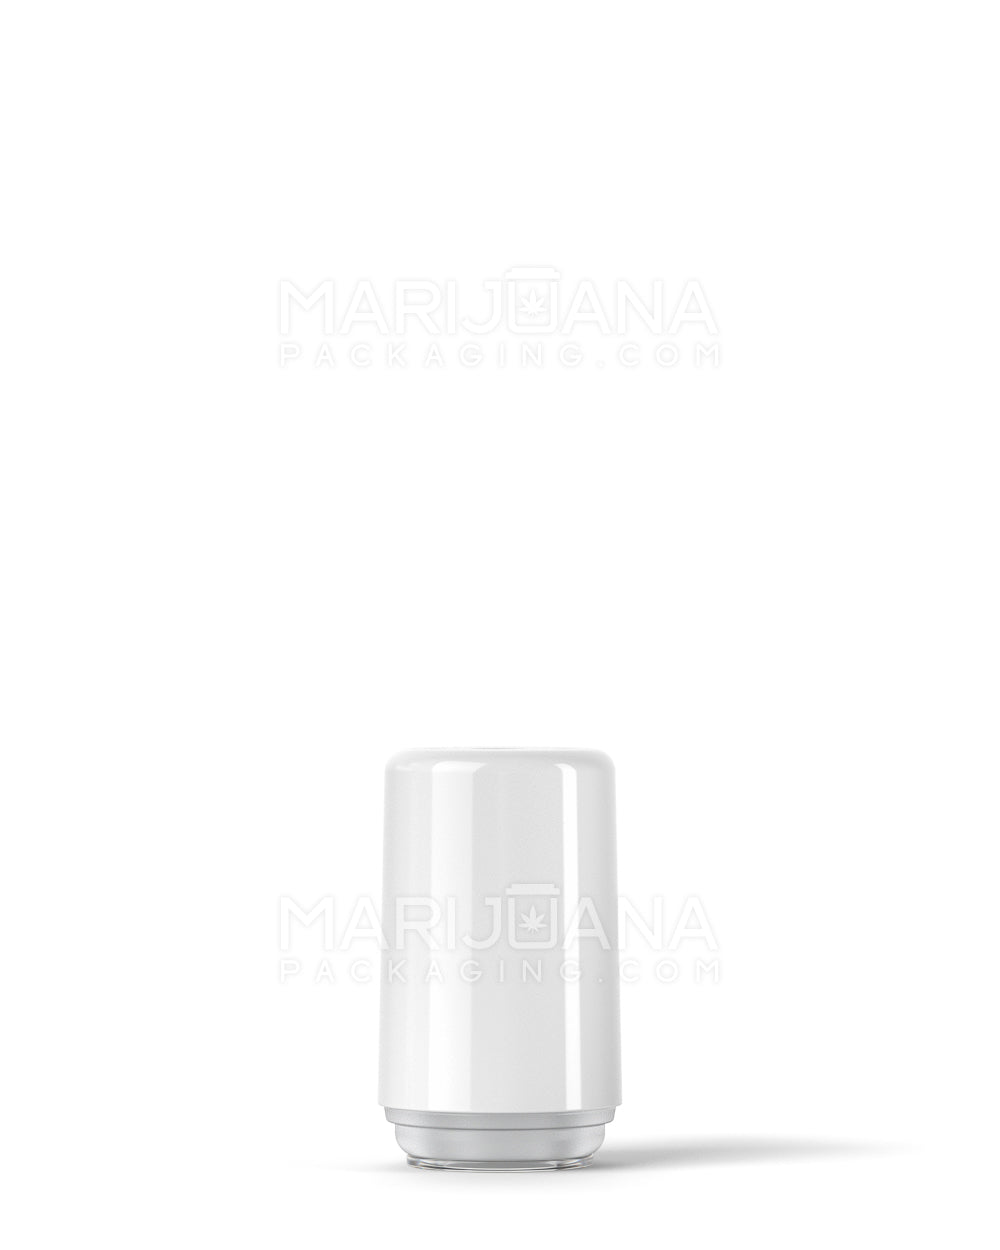 RAE | Round Vape Mouthpiece for Hand Press Plastic Cartridges | White Plastic - Hand Press - 400 Count - 2